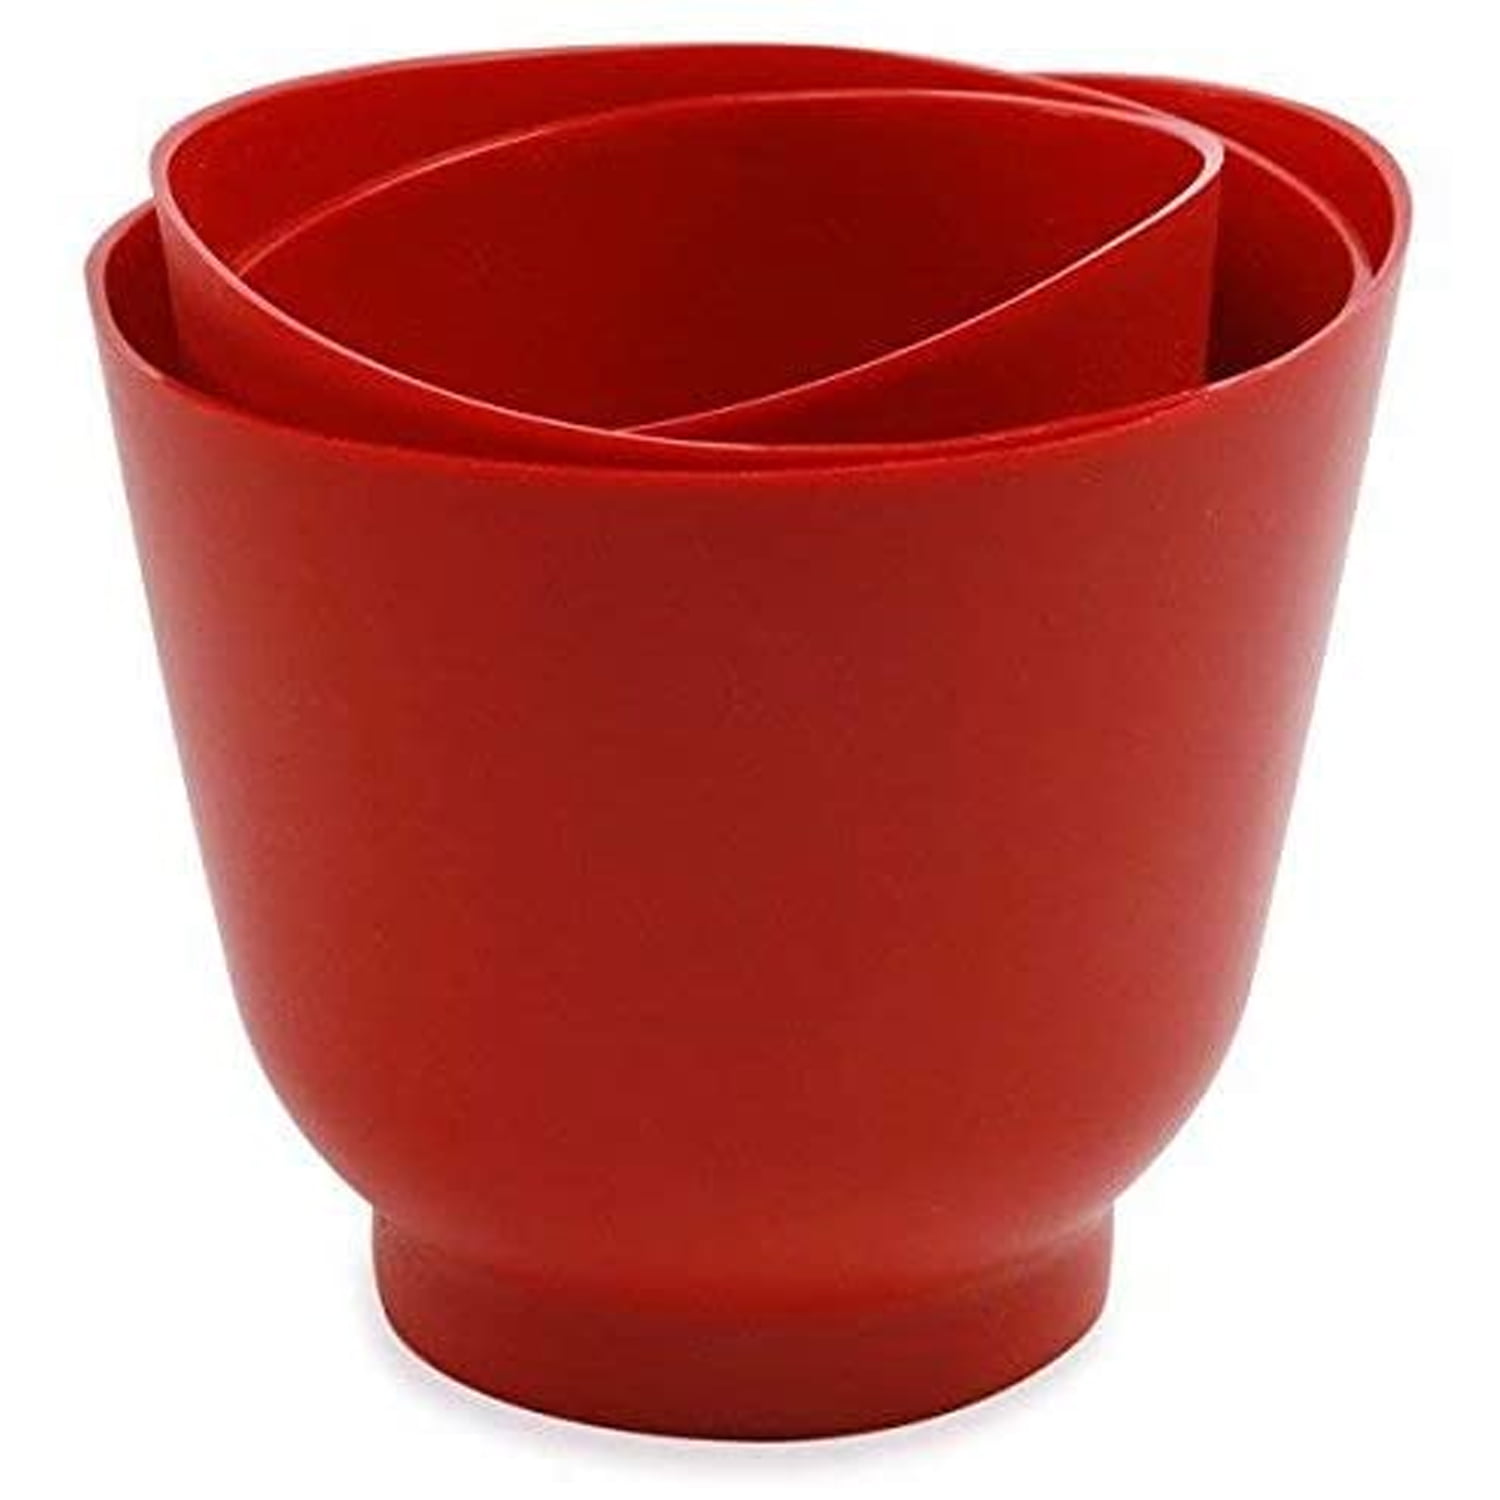 ForPro Silicone Mixing Bowl 14 Ounces